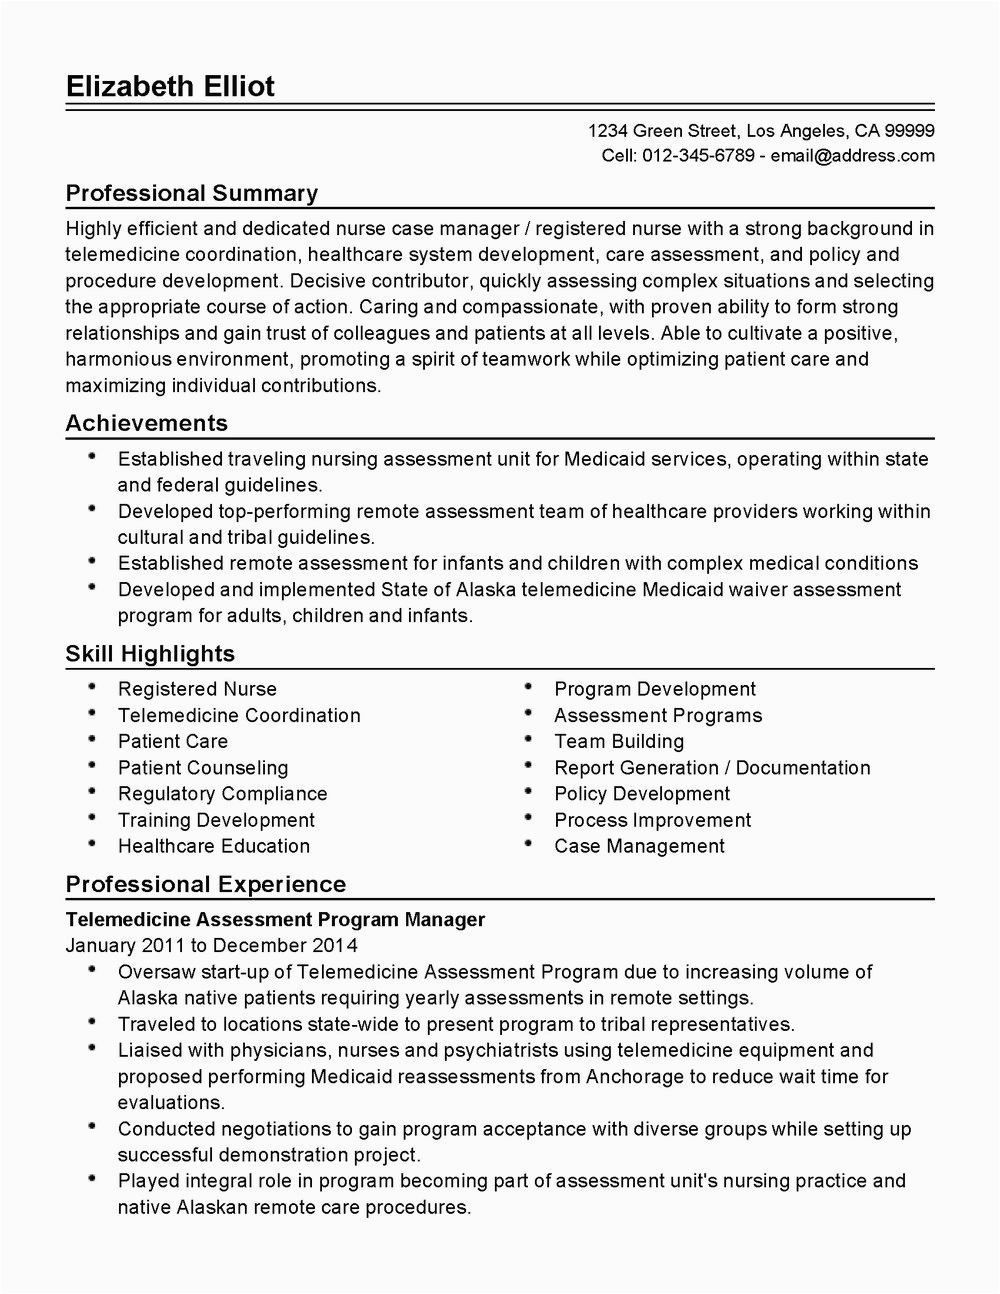 Sample Resume for Truck Driver with No Experience Resume for Truck Driver with No Experience